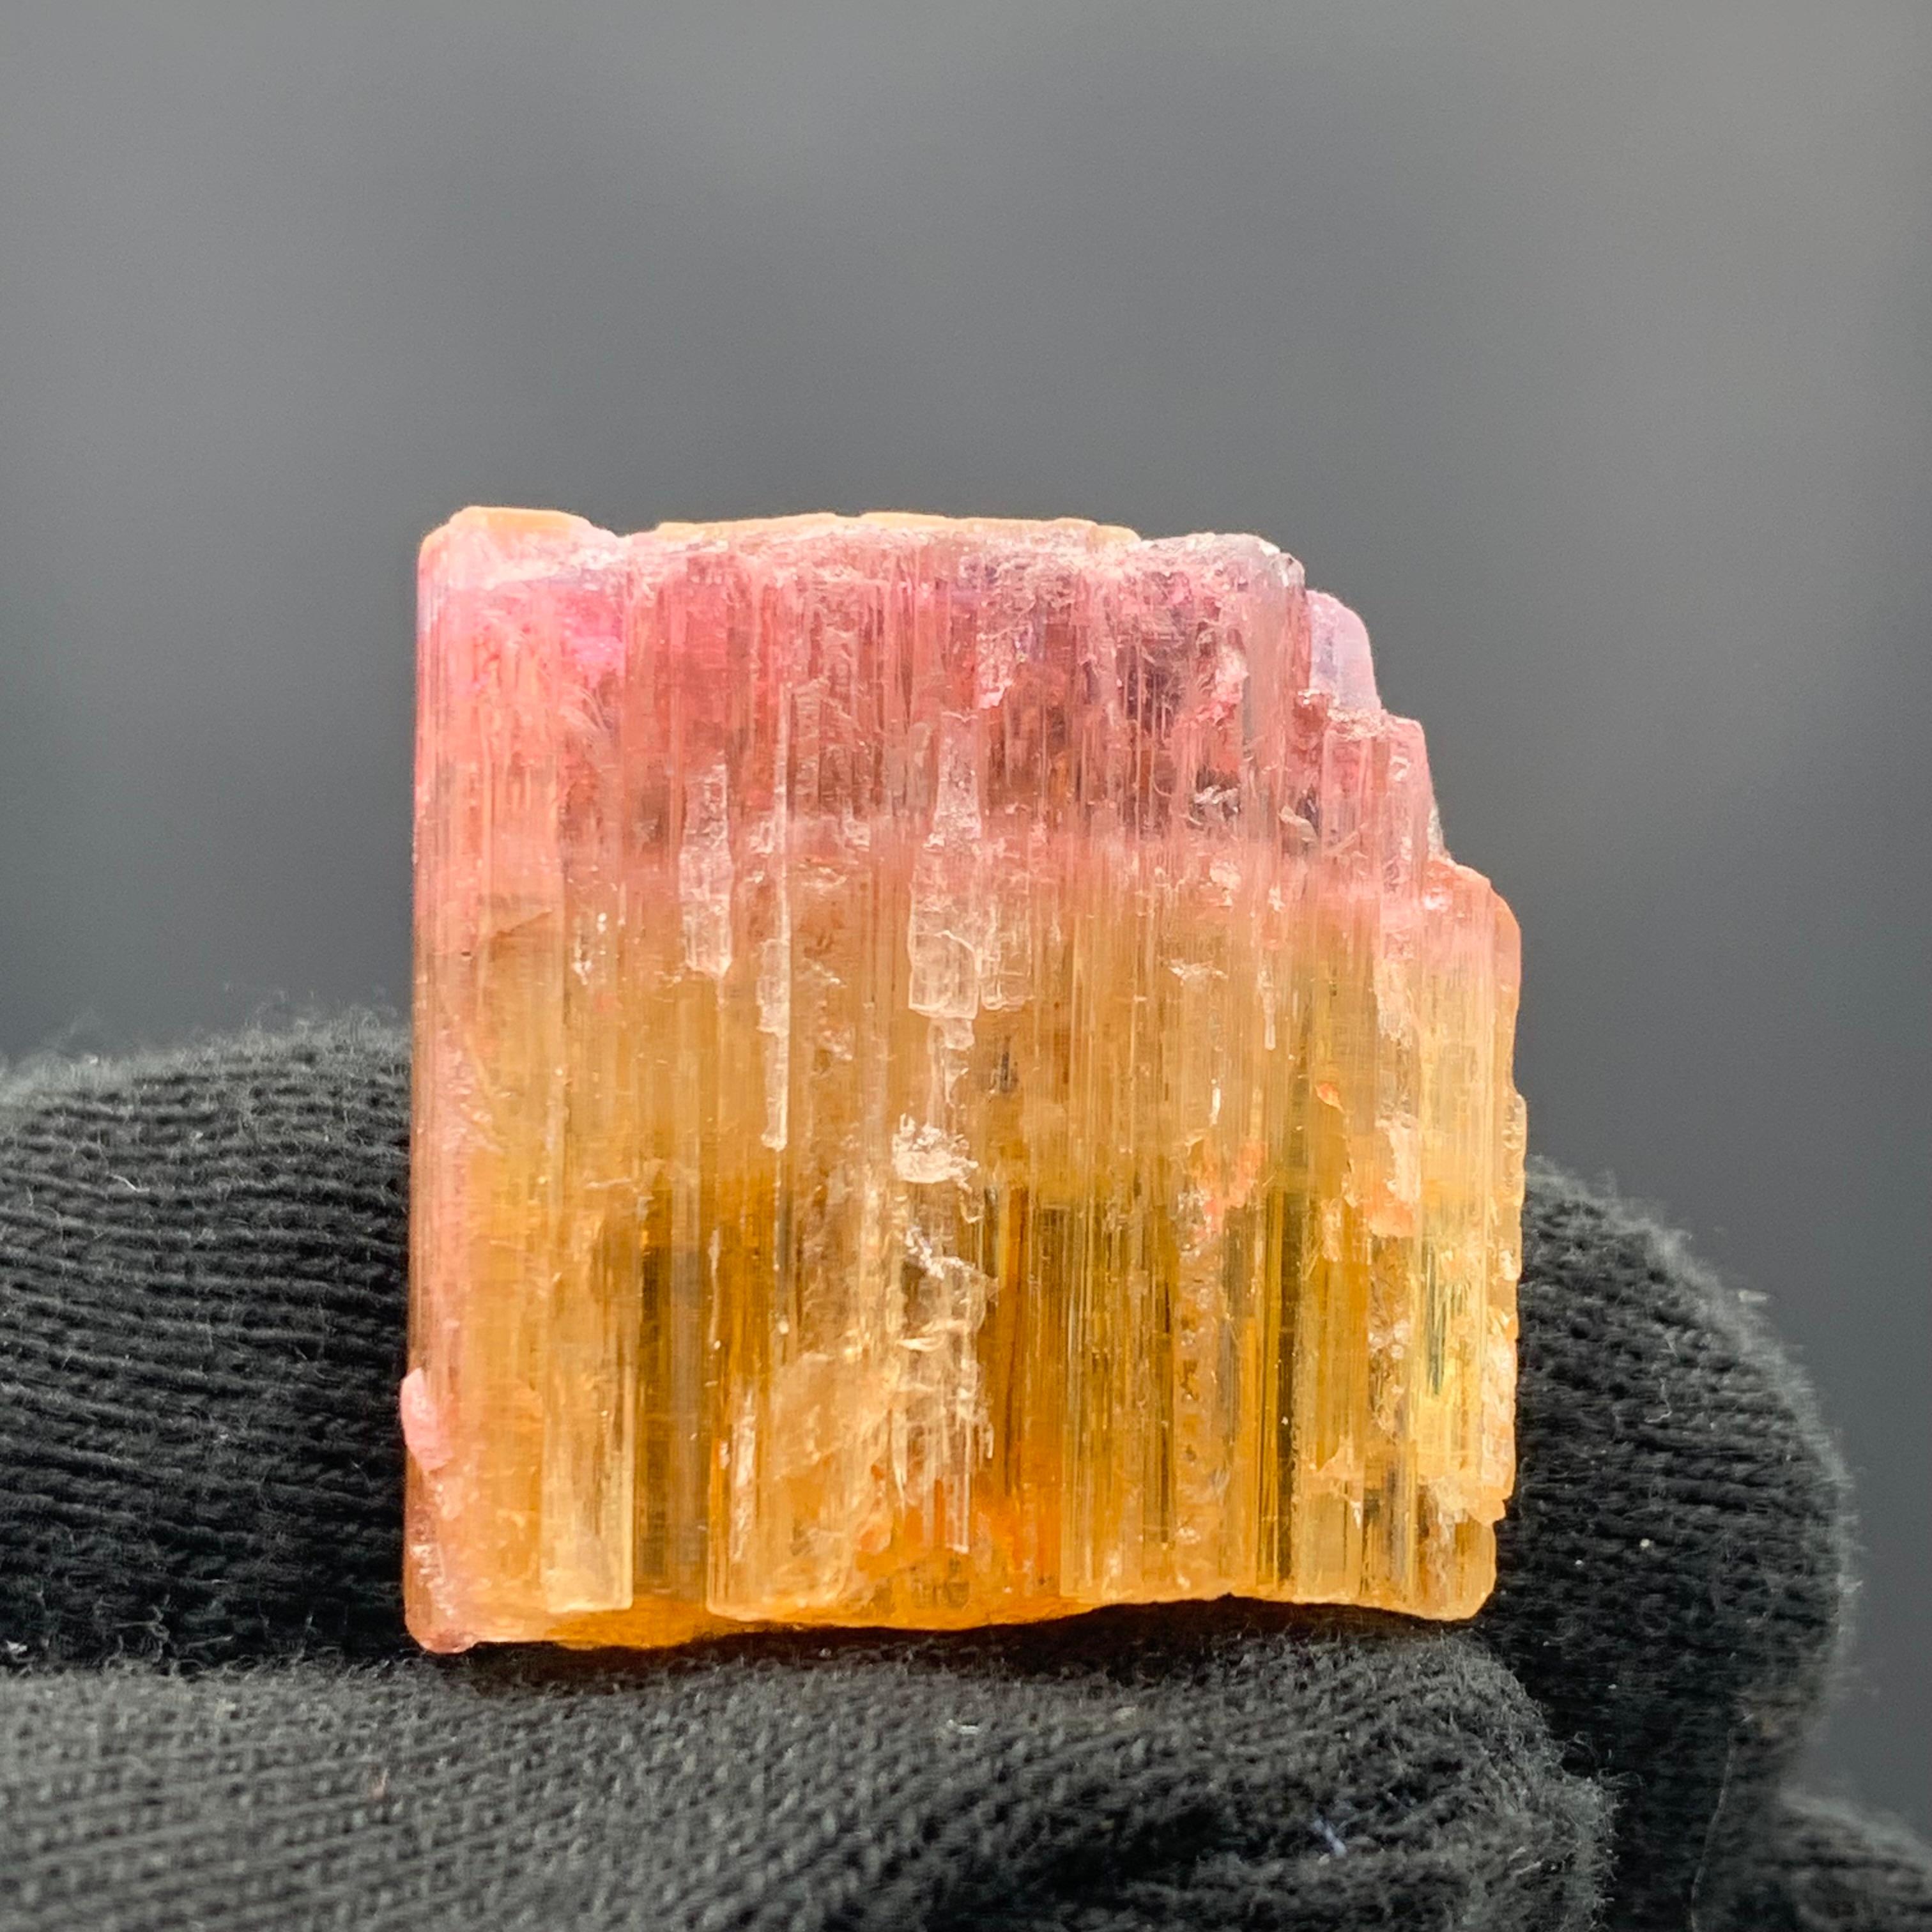 Adam Style 59.15 Carat Beautiful Bi Color Tourmaline Crystal From Paprook Mine, Afghanistan For Sale